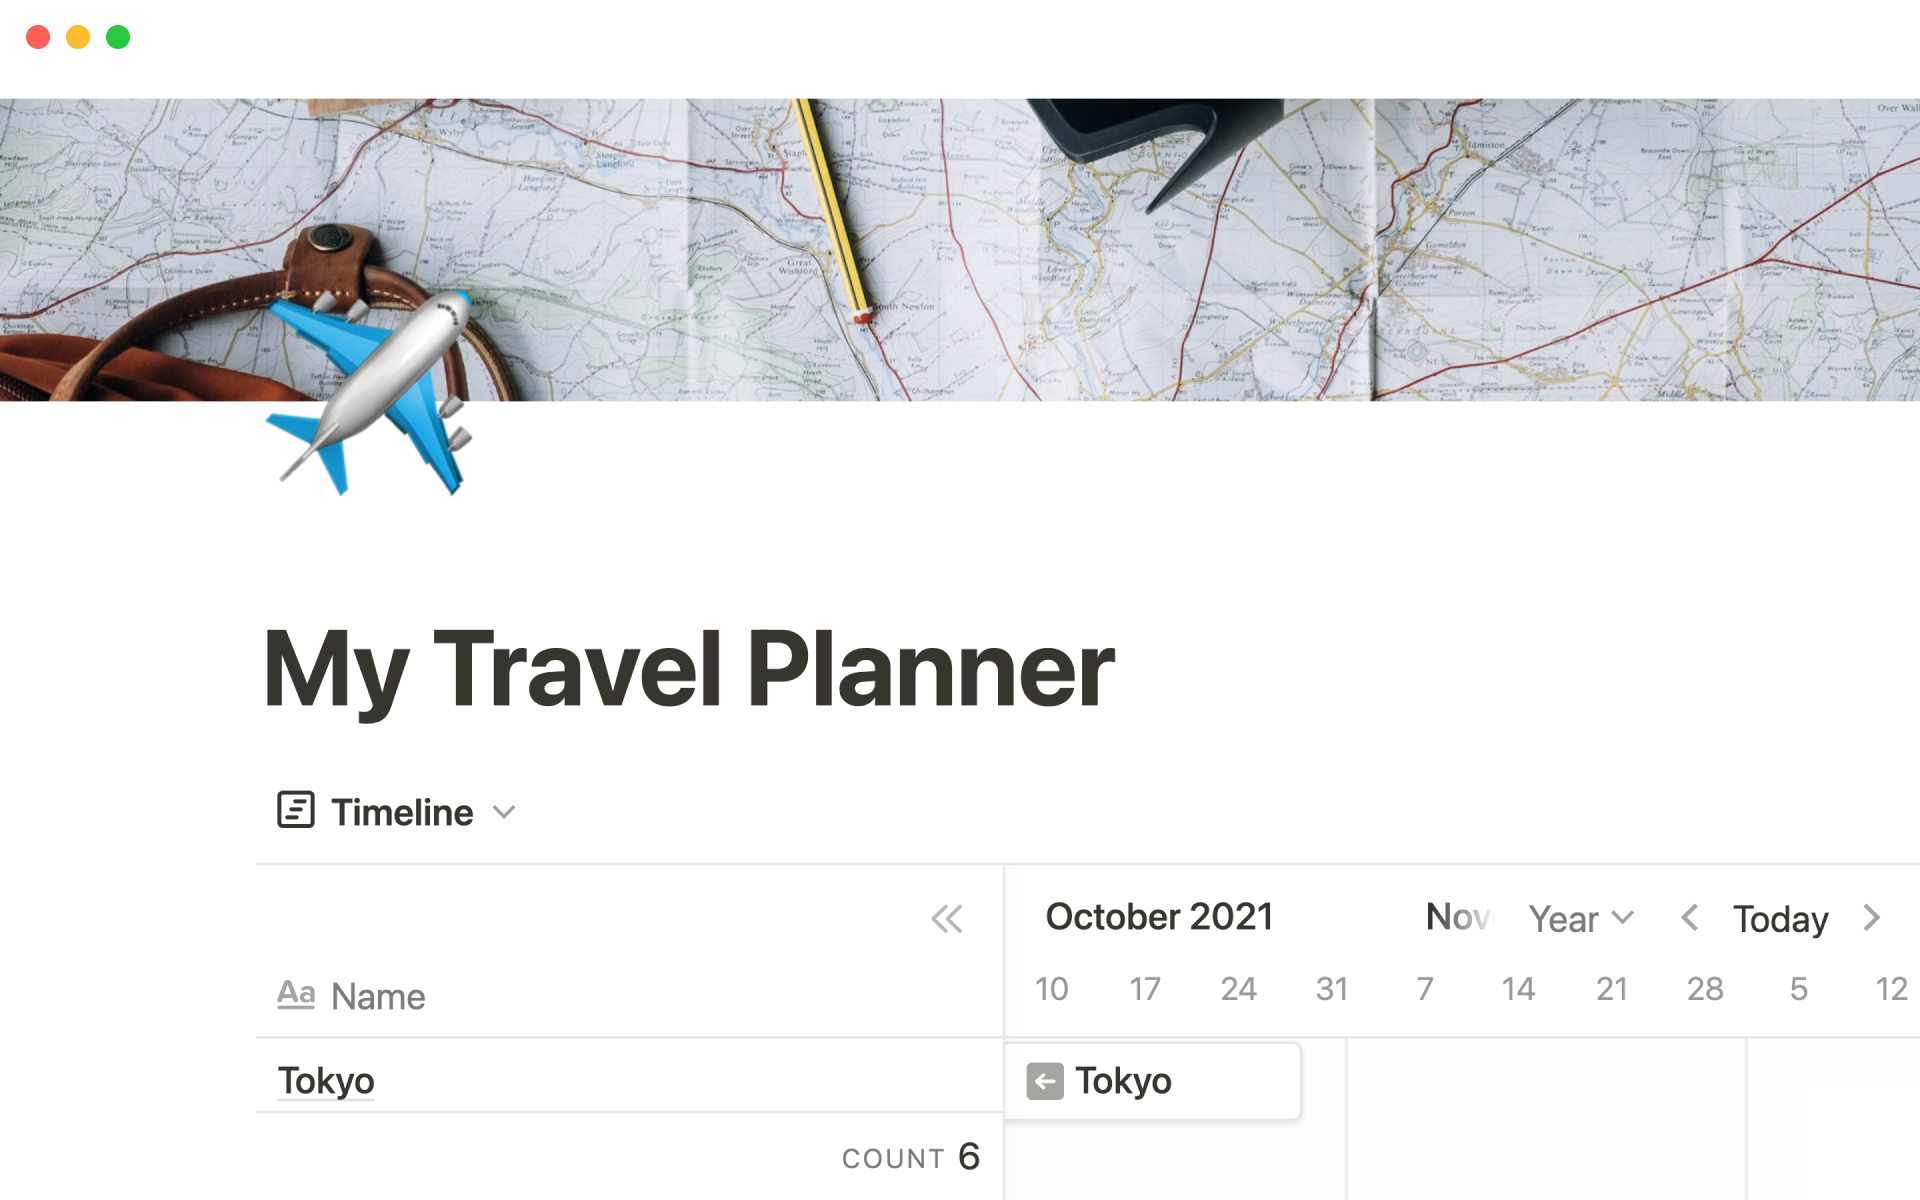 Conveniently organizes your trip details, links, documents, and more.